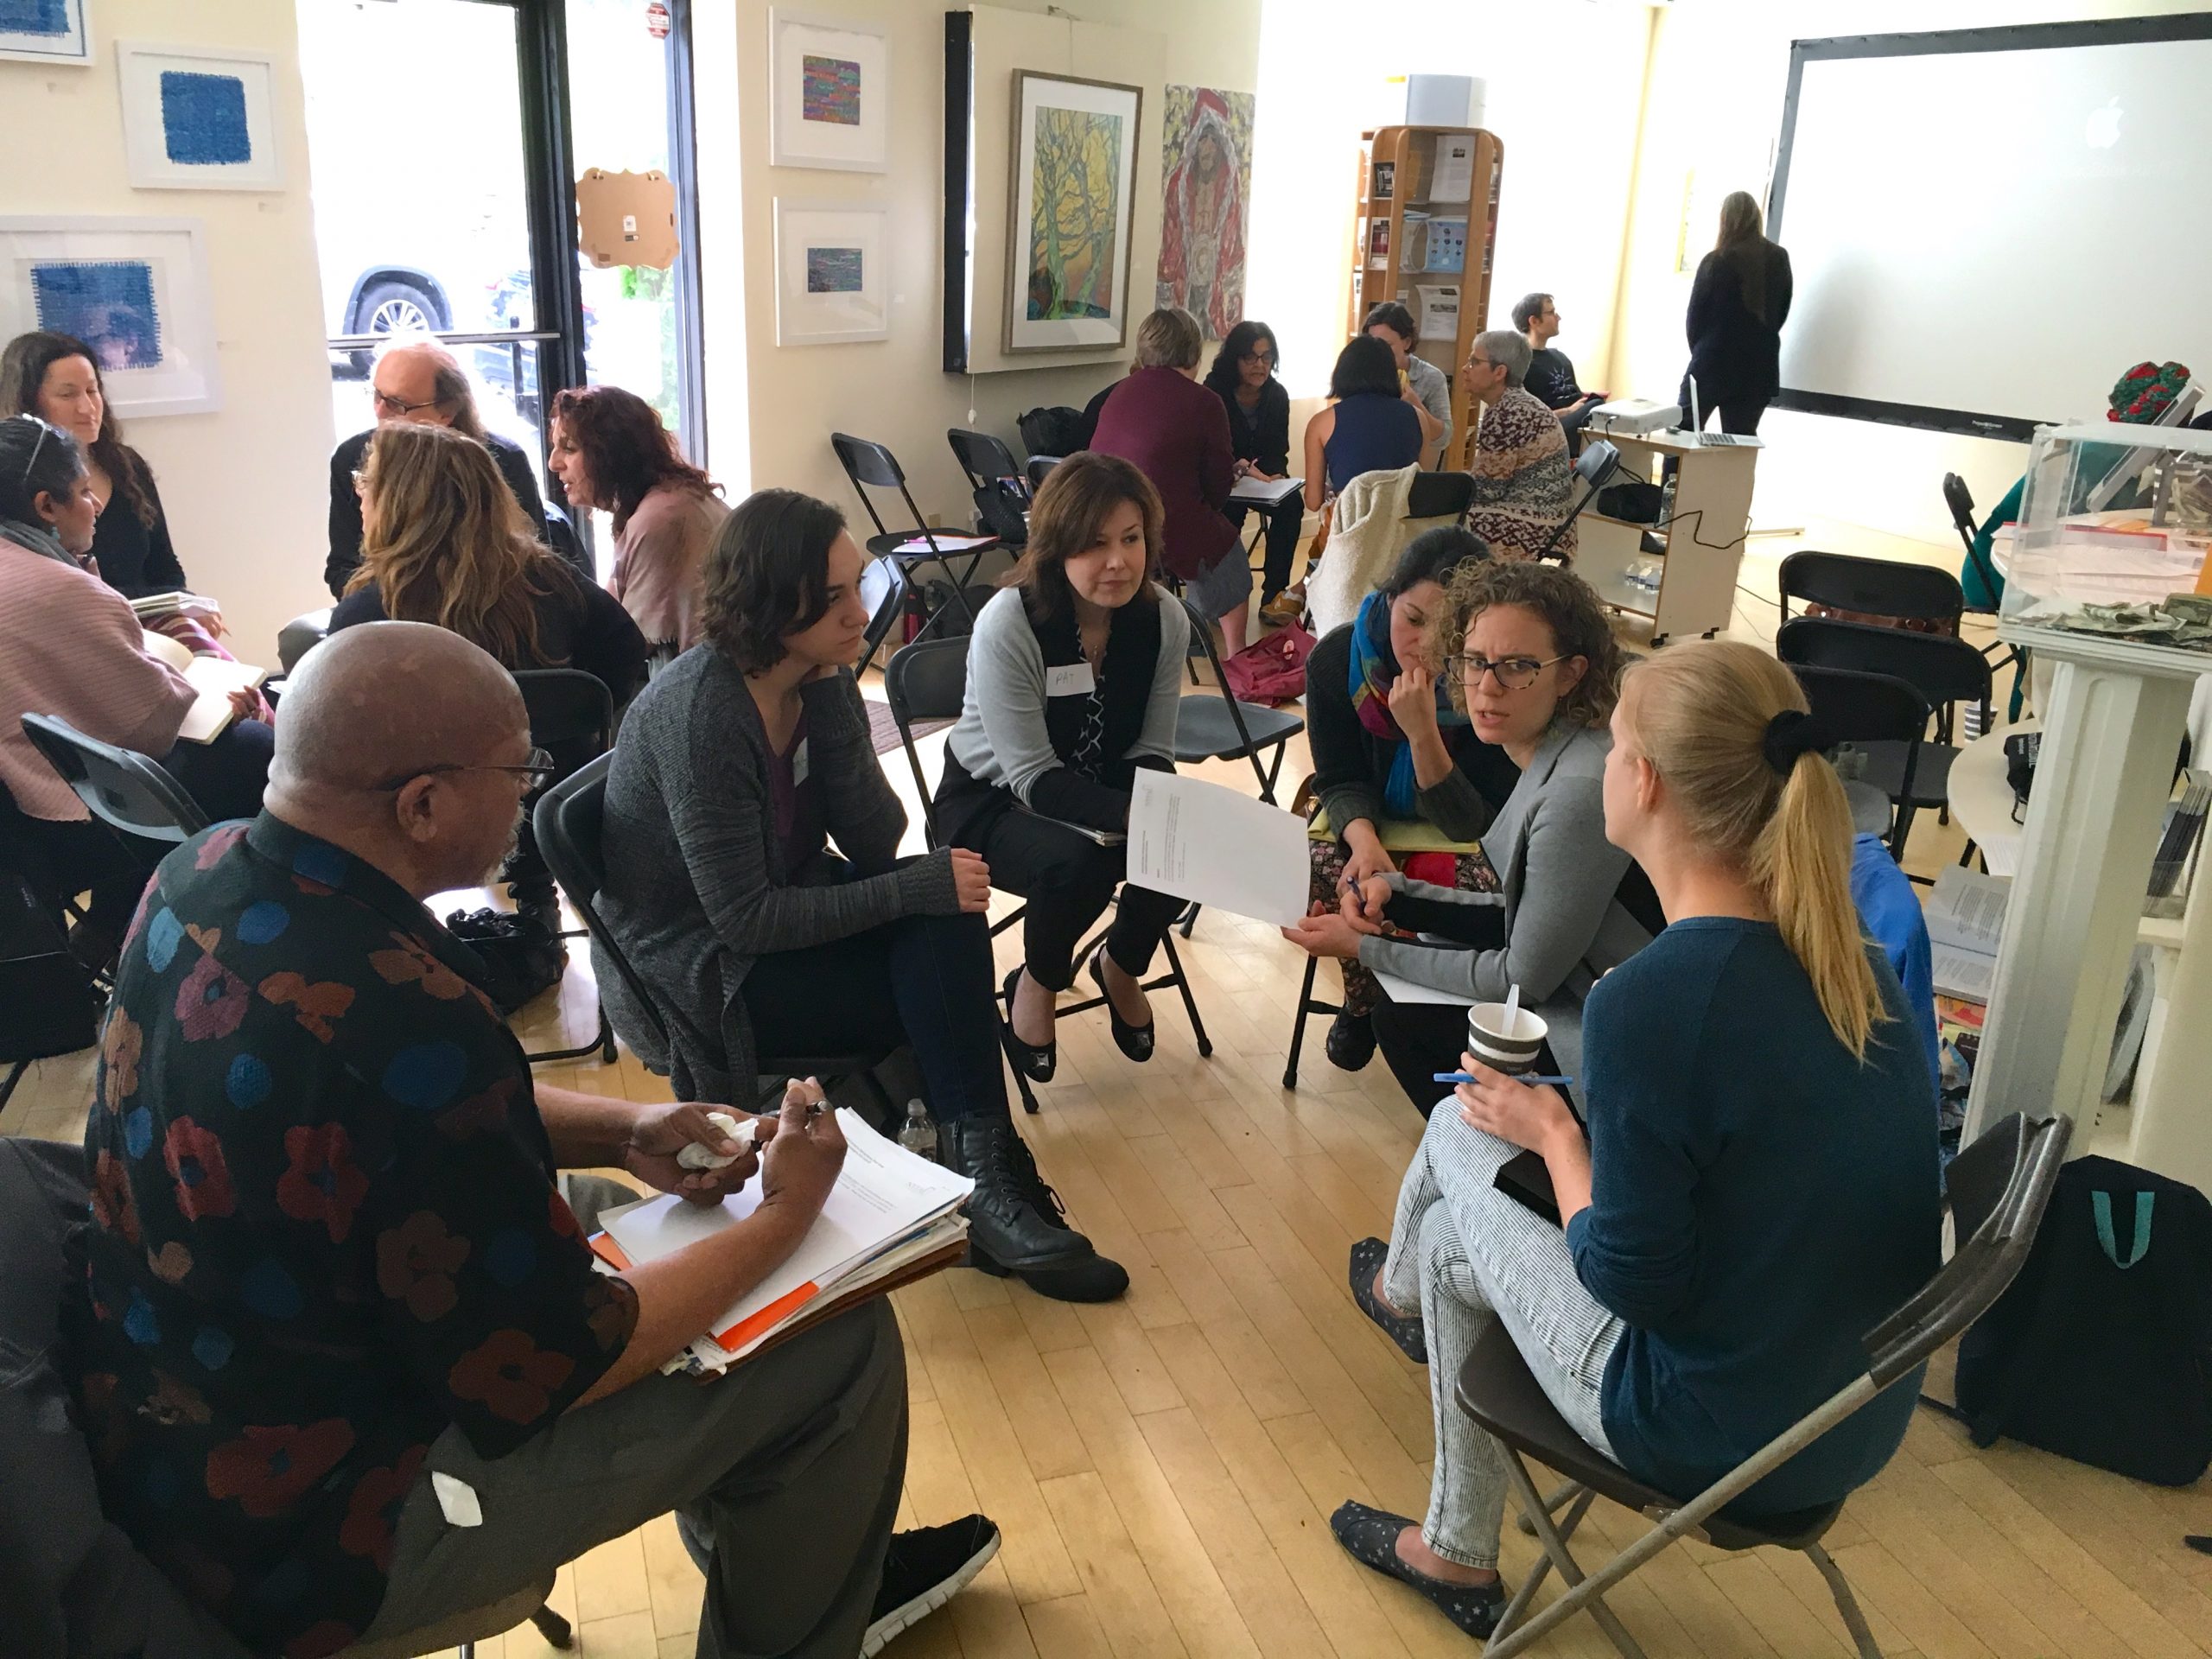 Artists in a group discussing professional practices at the NYSCA/NYFA Artist as Entrepreneur Program at Huntington Arts Council.